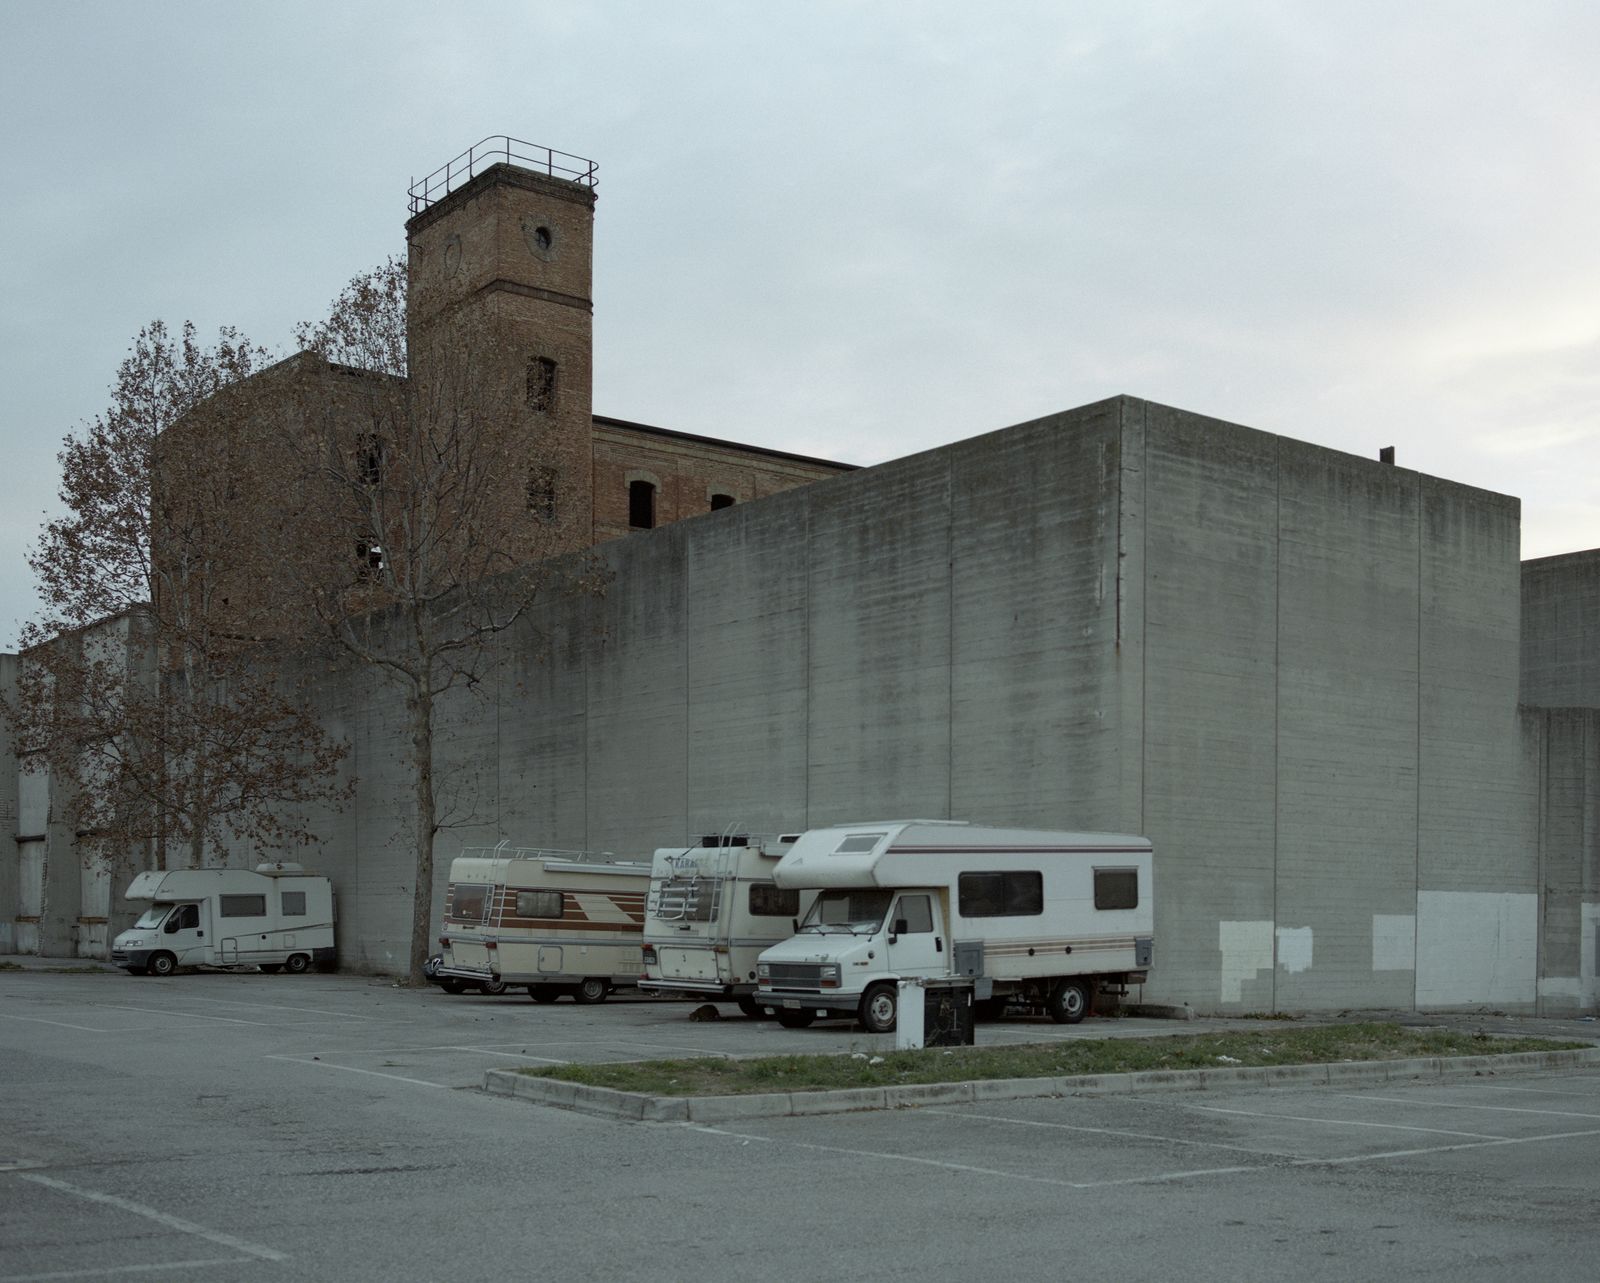 © Tommaso Rada - Italy, Trieste. A view of Risiera di San Sabba, a concentration camp during the World War II.